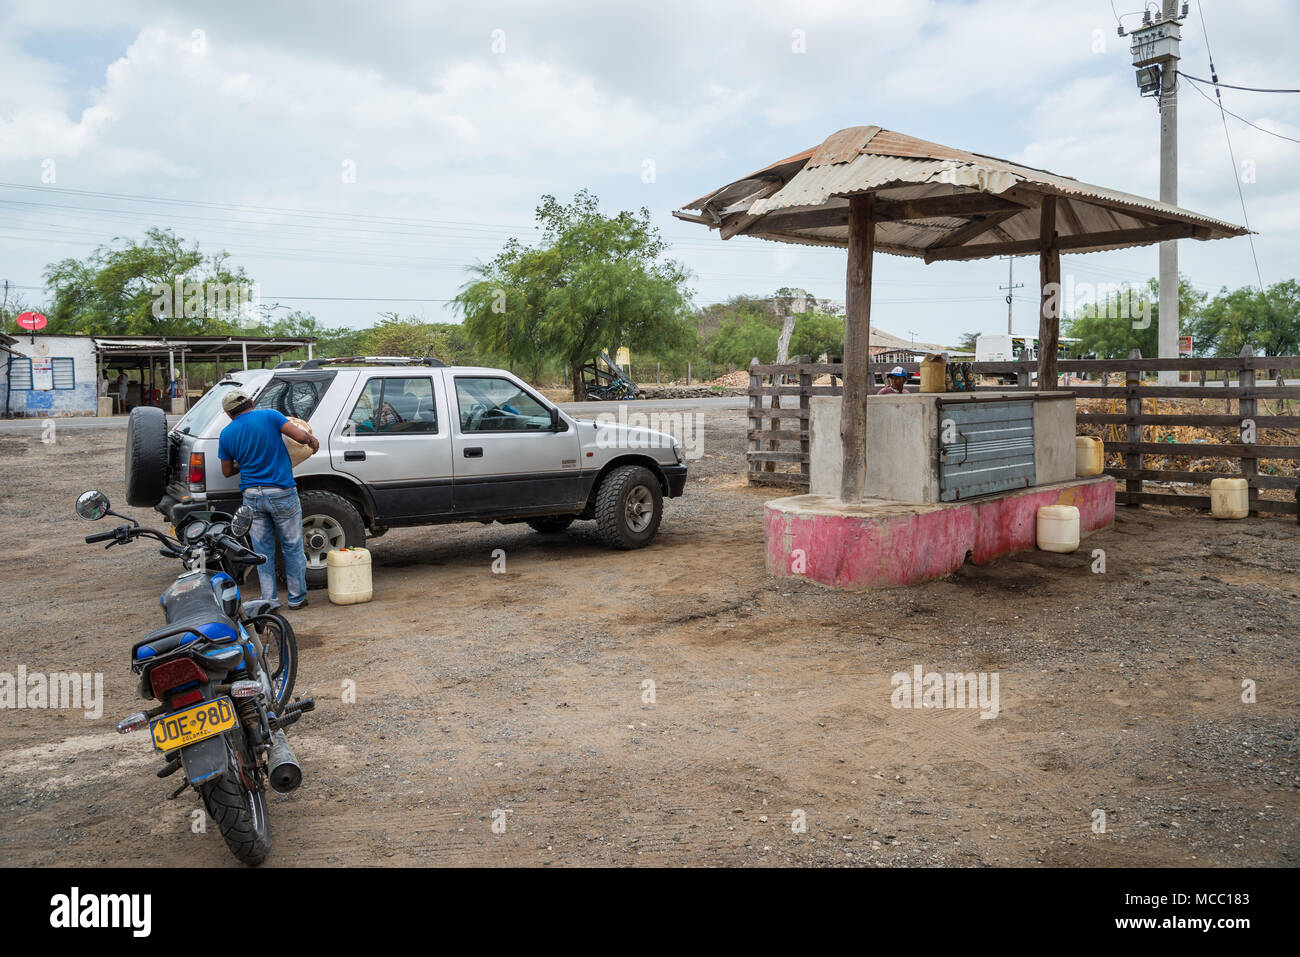 A man fills up gasoline for a car at a rural petro station. Colombia, South America. Stock Photo